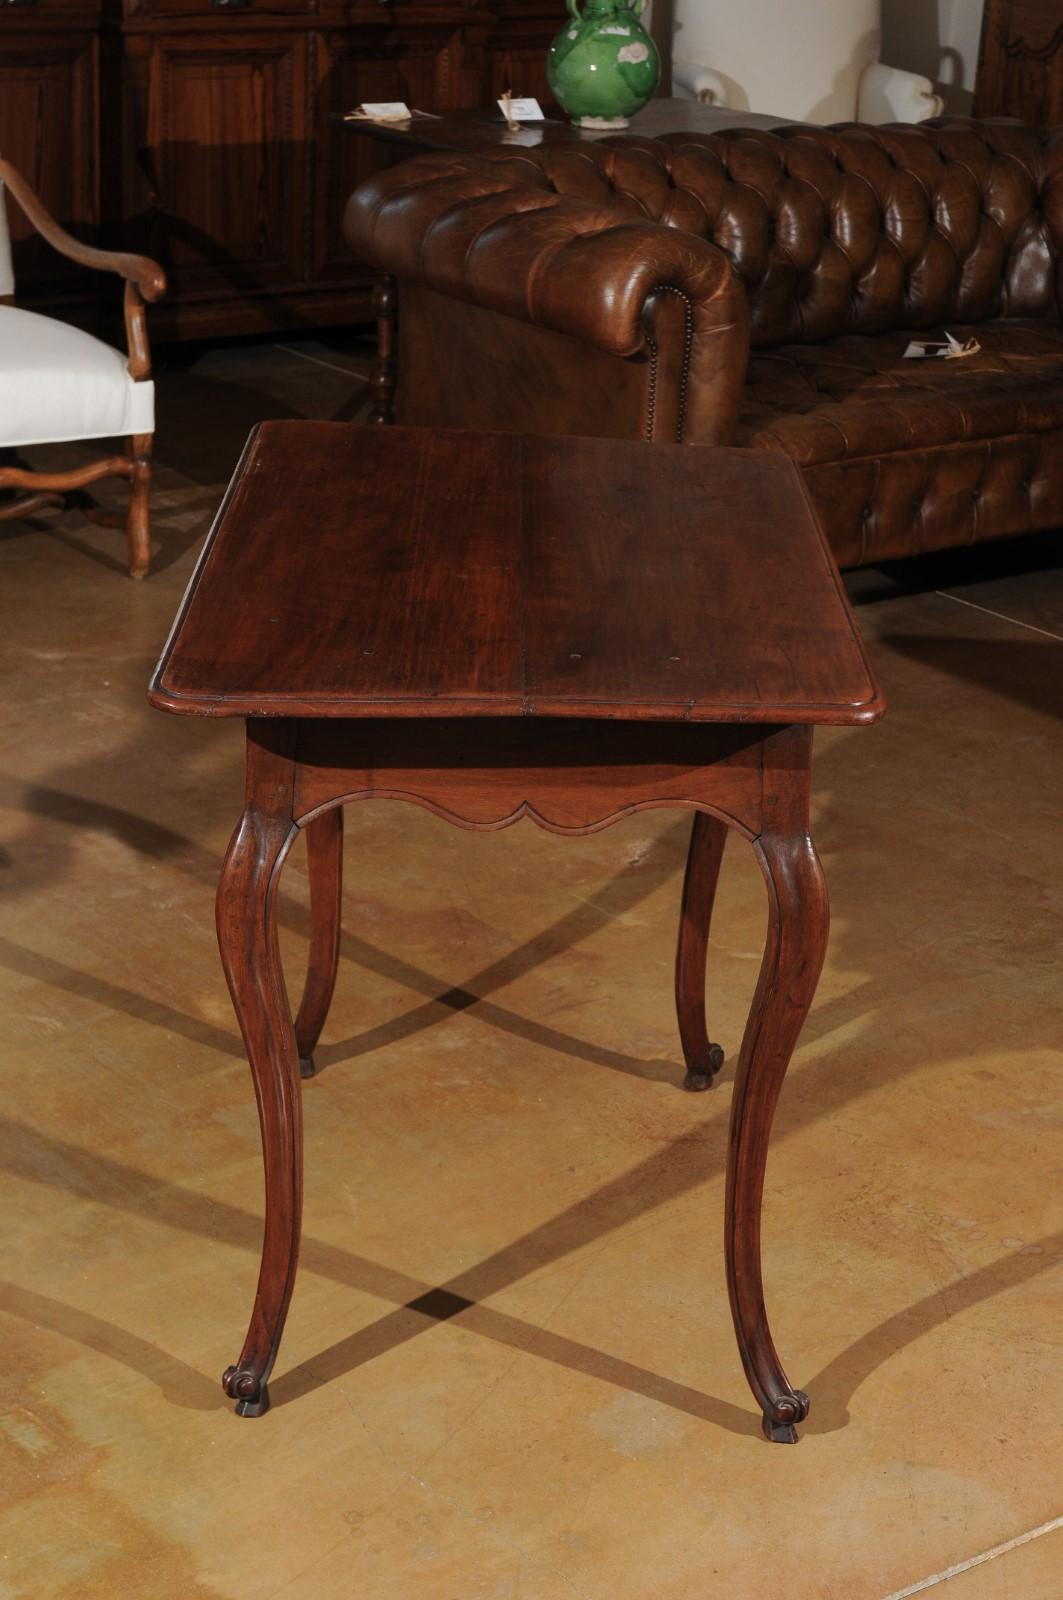 French Louis XV 1780s Solid Walnut Side Table with Drawer and Fretted Motifs (Französisch)